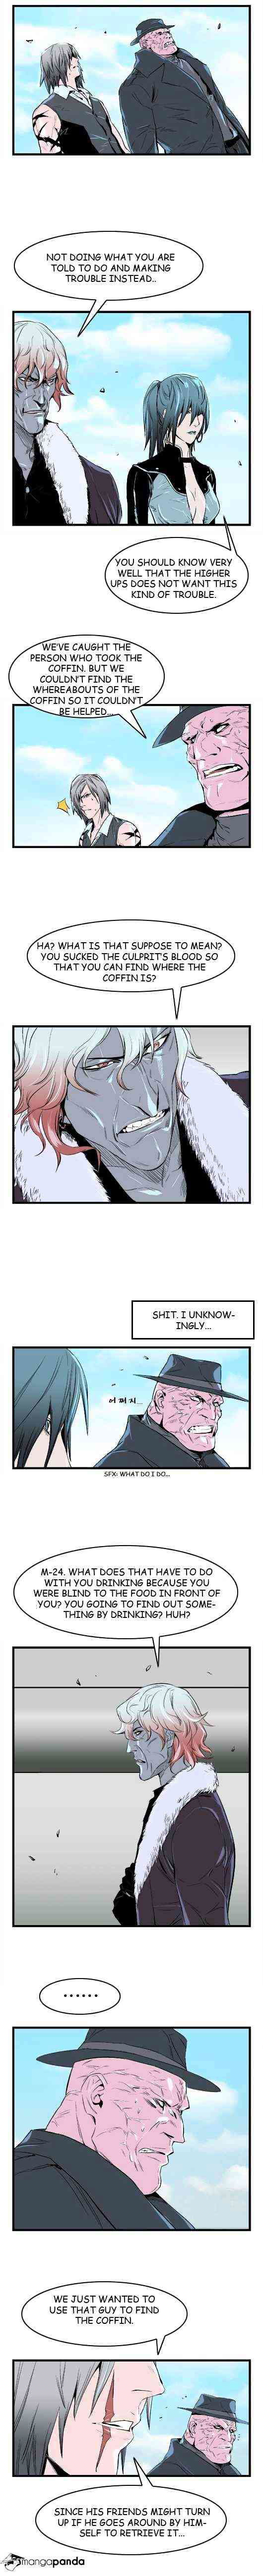 Noblesse Chapter 37 page 2